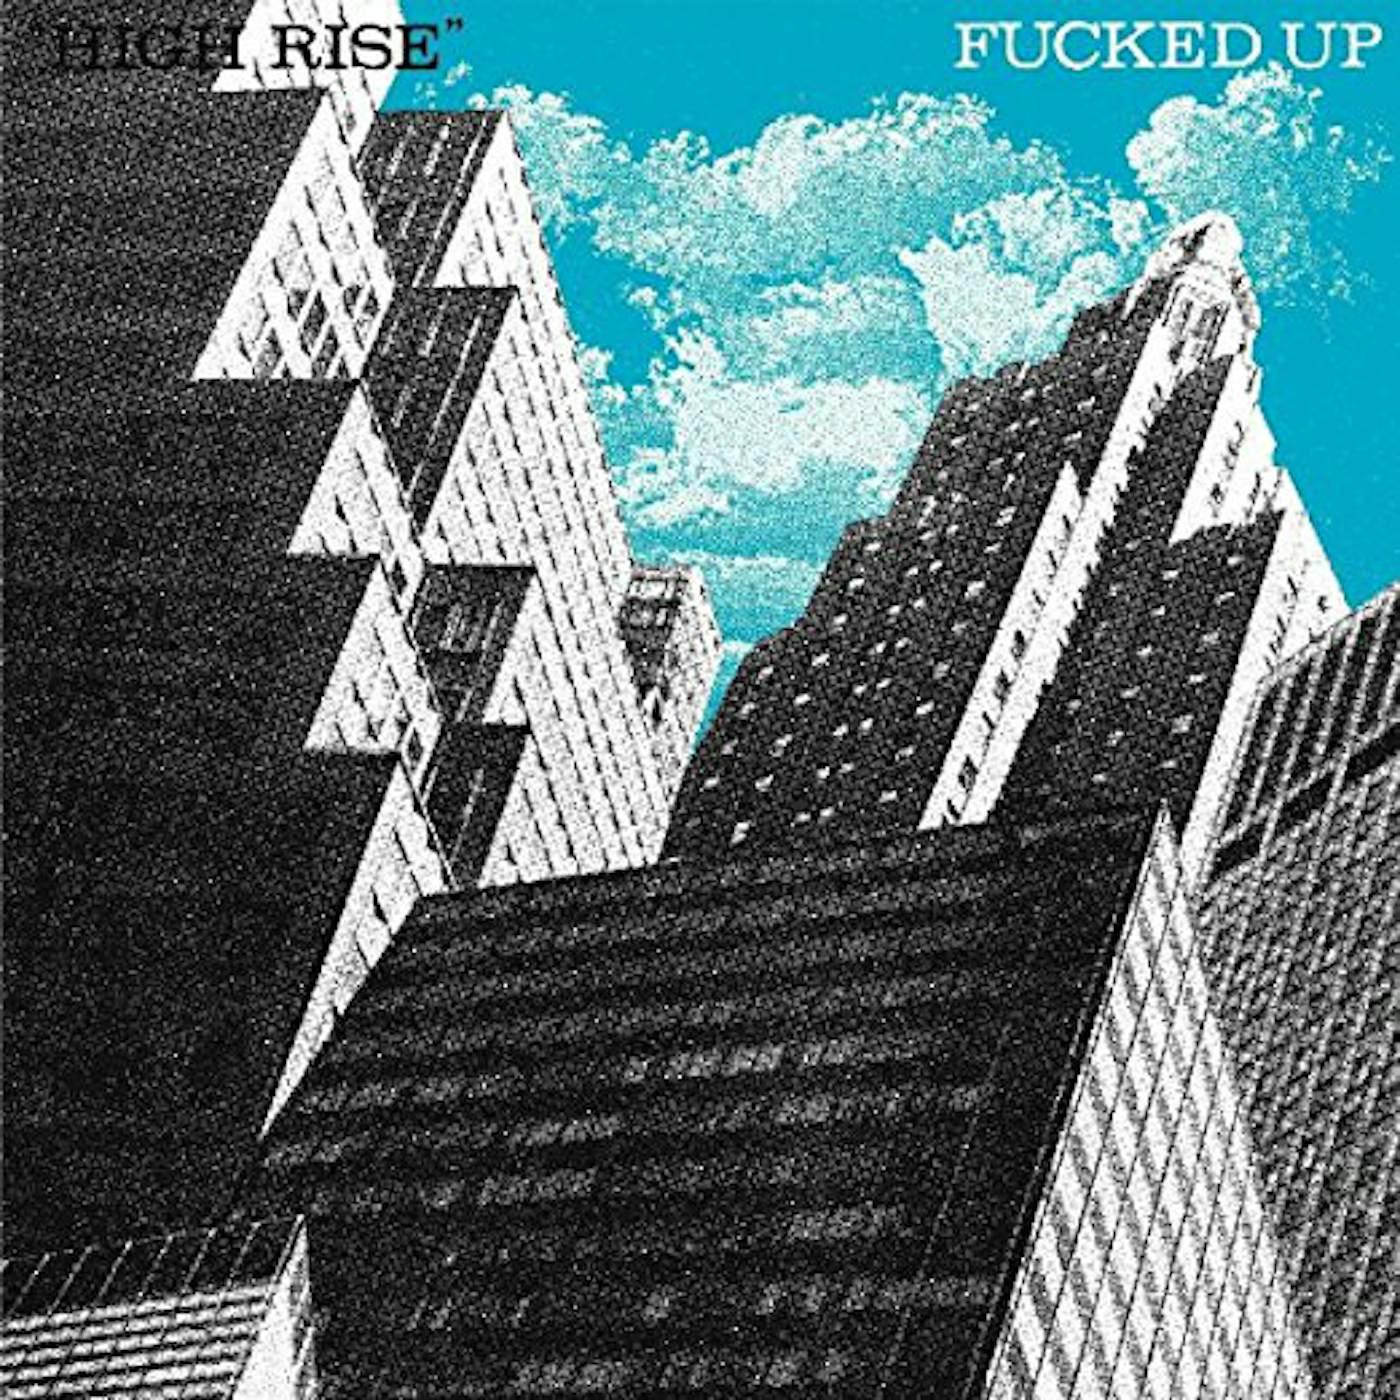 Fucked Up High Rise Vinyl Record